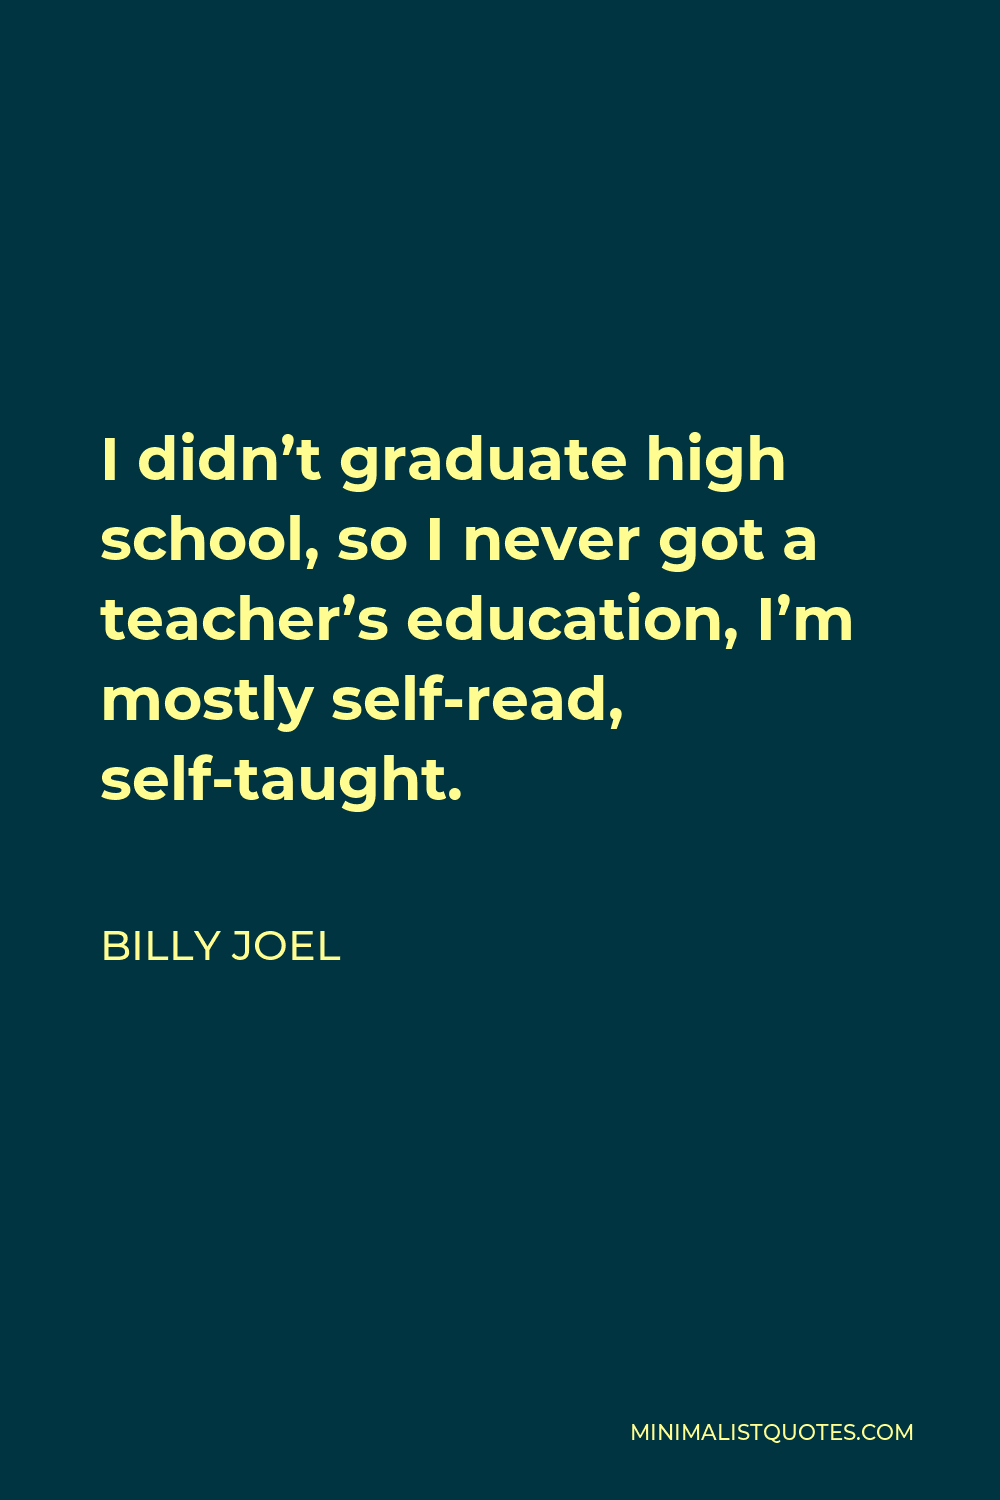 Billy Joel Quote - I didn’t graduate high school, so I never got a teacher’s education, I’m mostly self-read, self-taught.